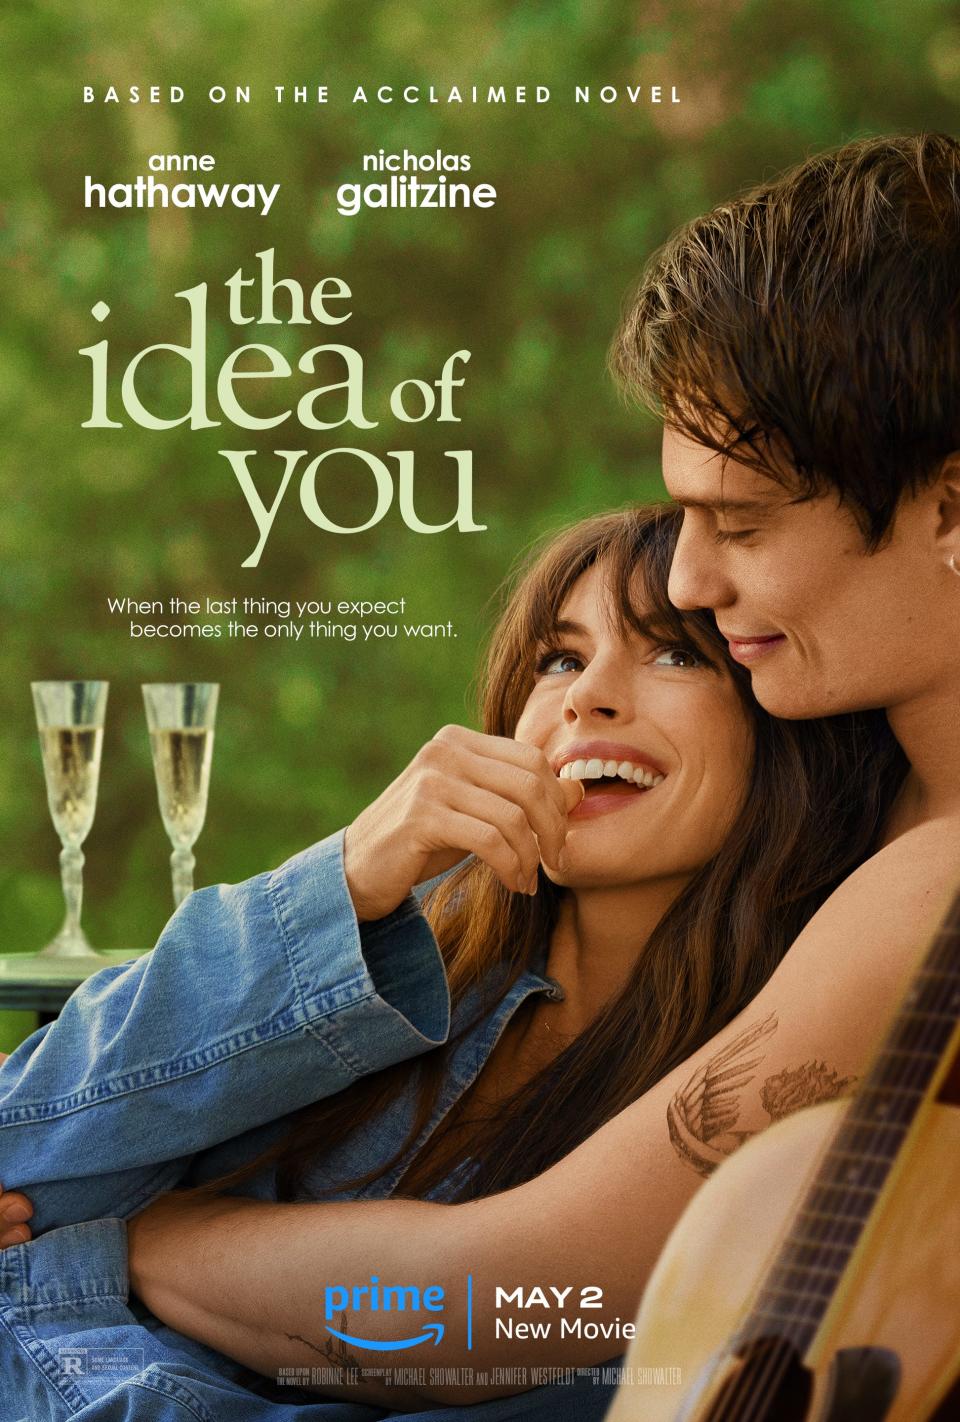 "The Idea of You" stars Anne Hathaway and Nicholas Galitzine.